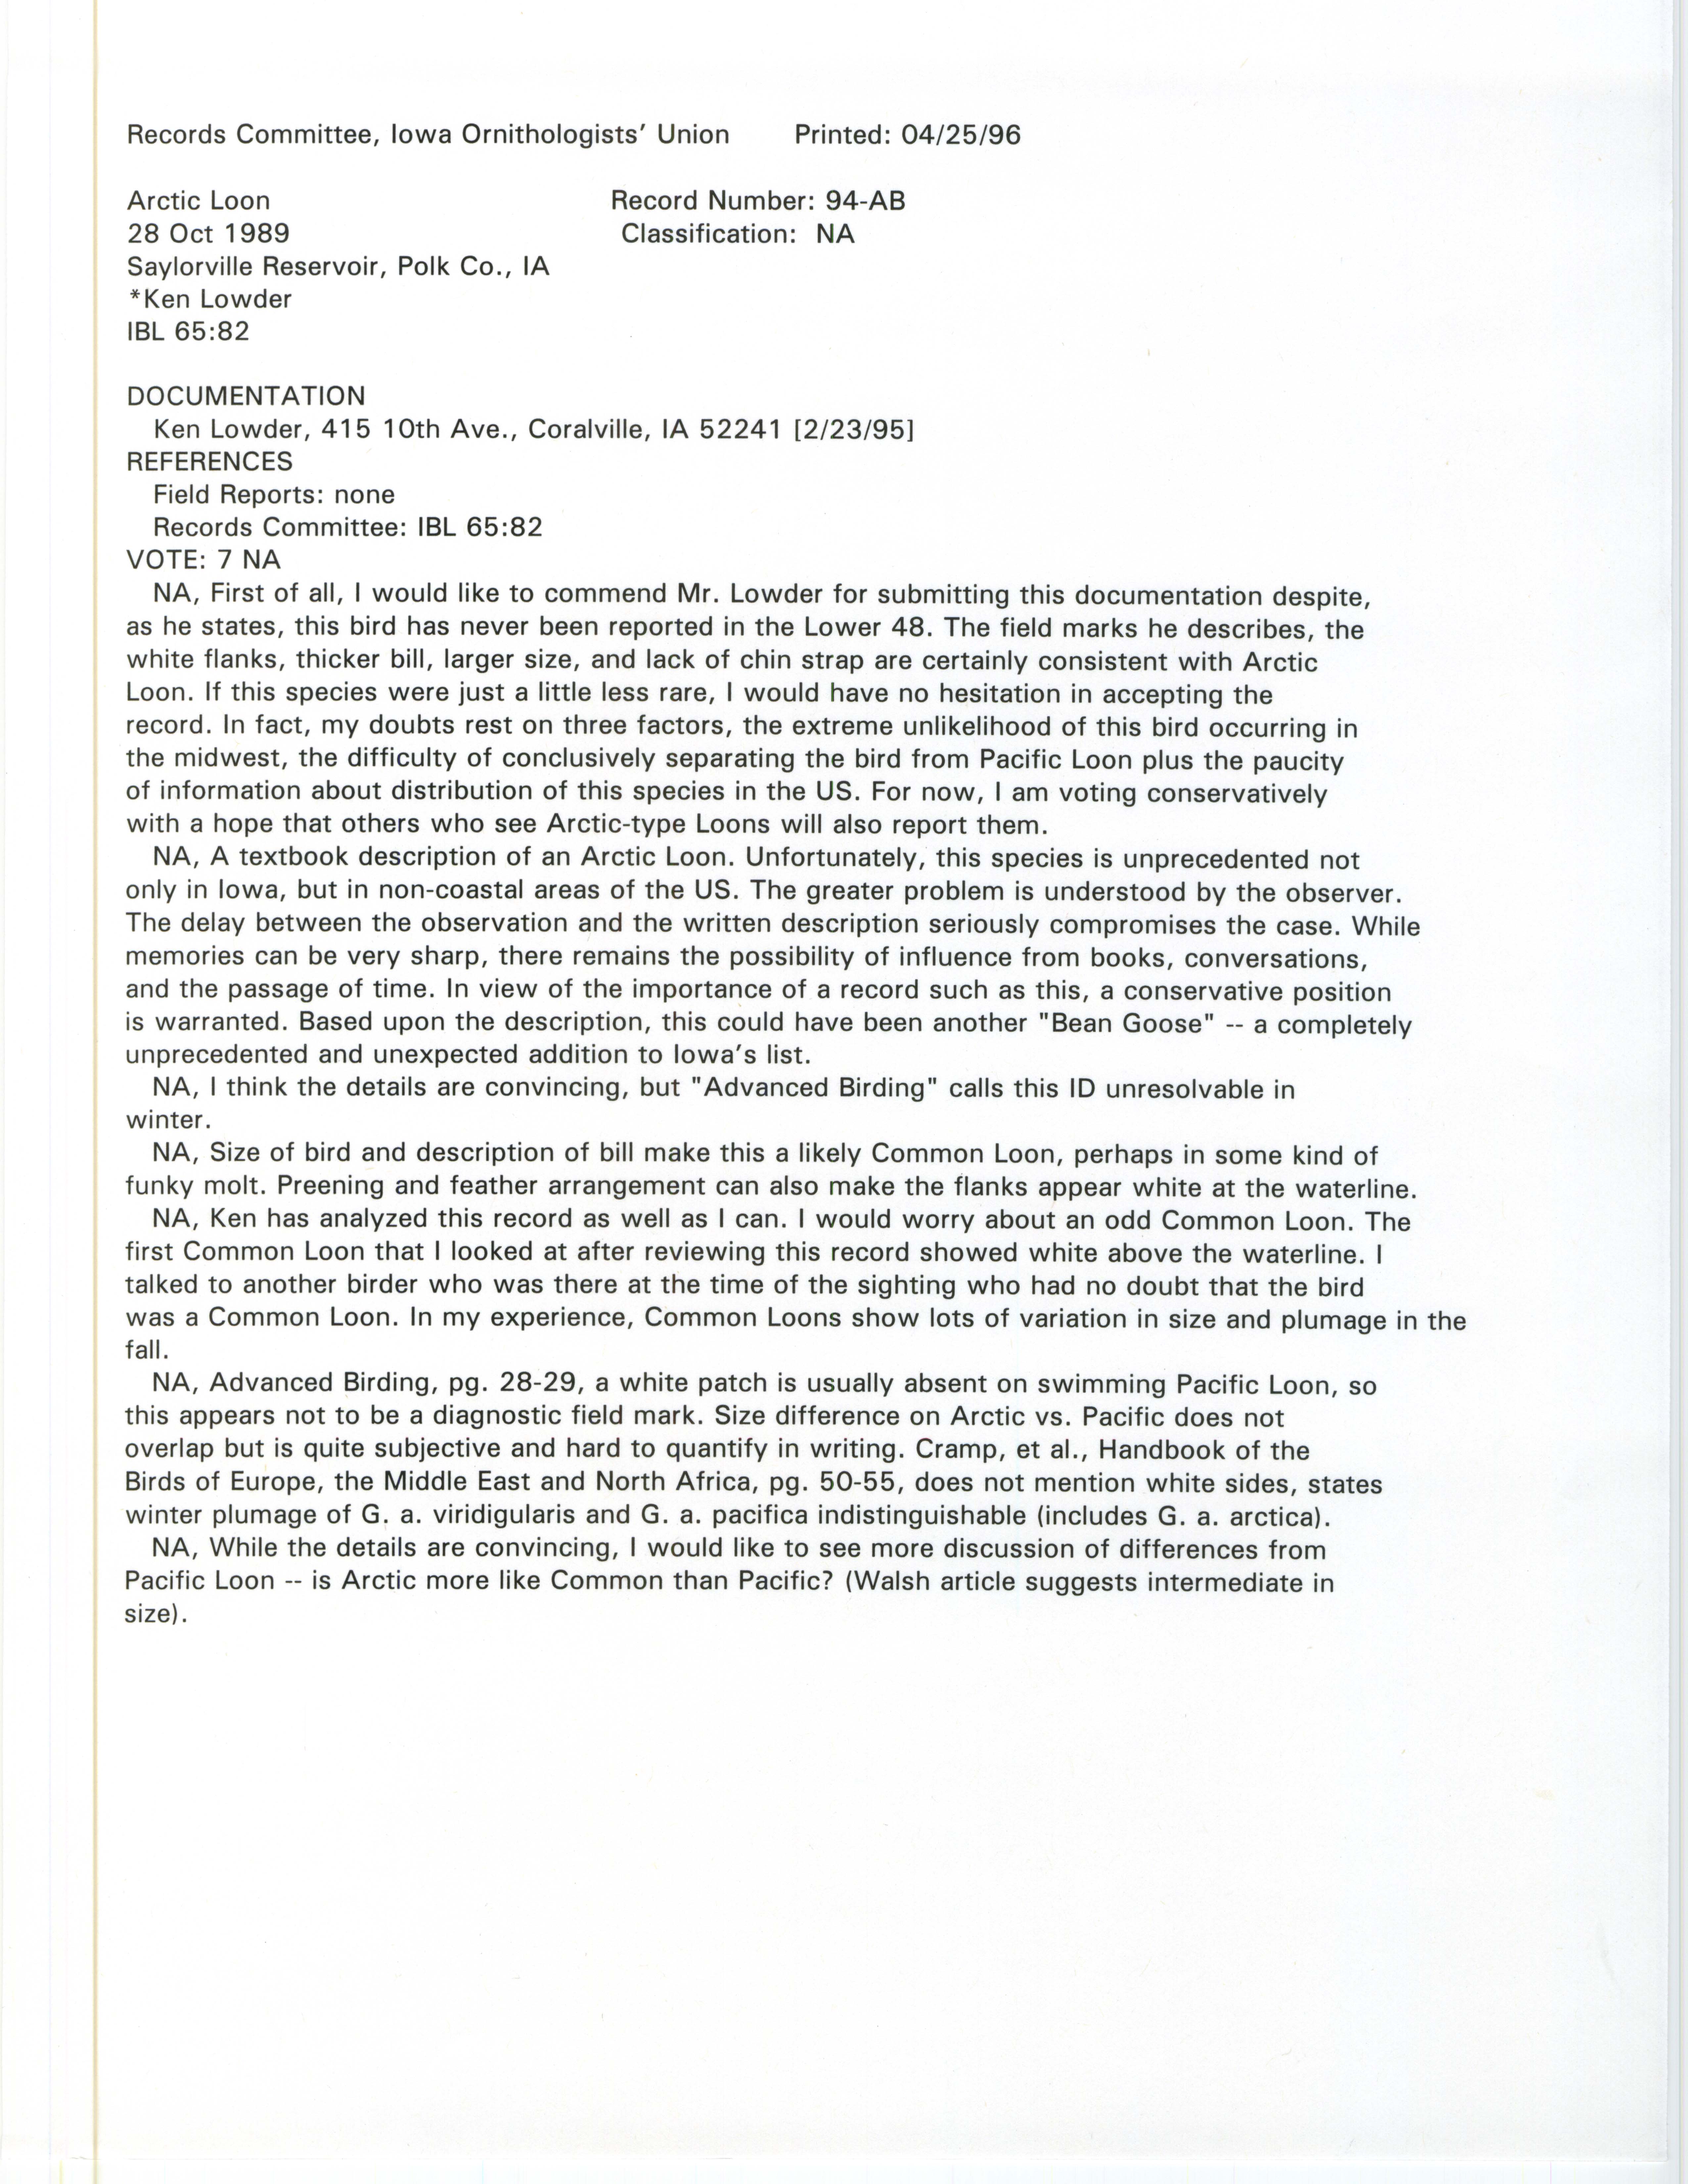 Records Committee review rare bird sighting of Arctic Loon at Saylorville Reservoir, 1989